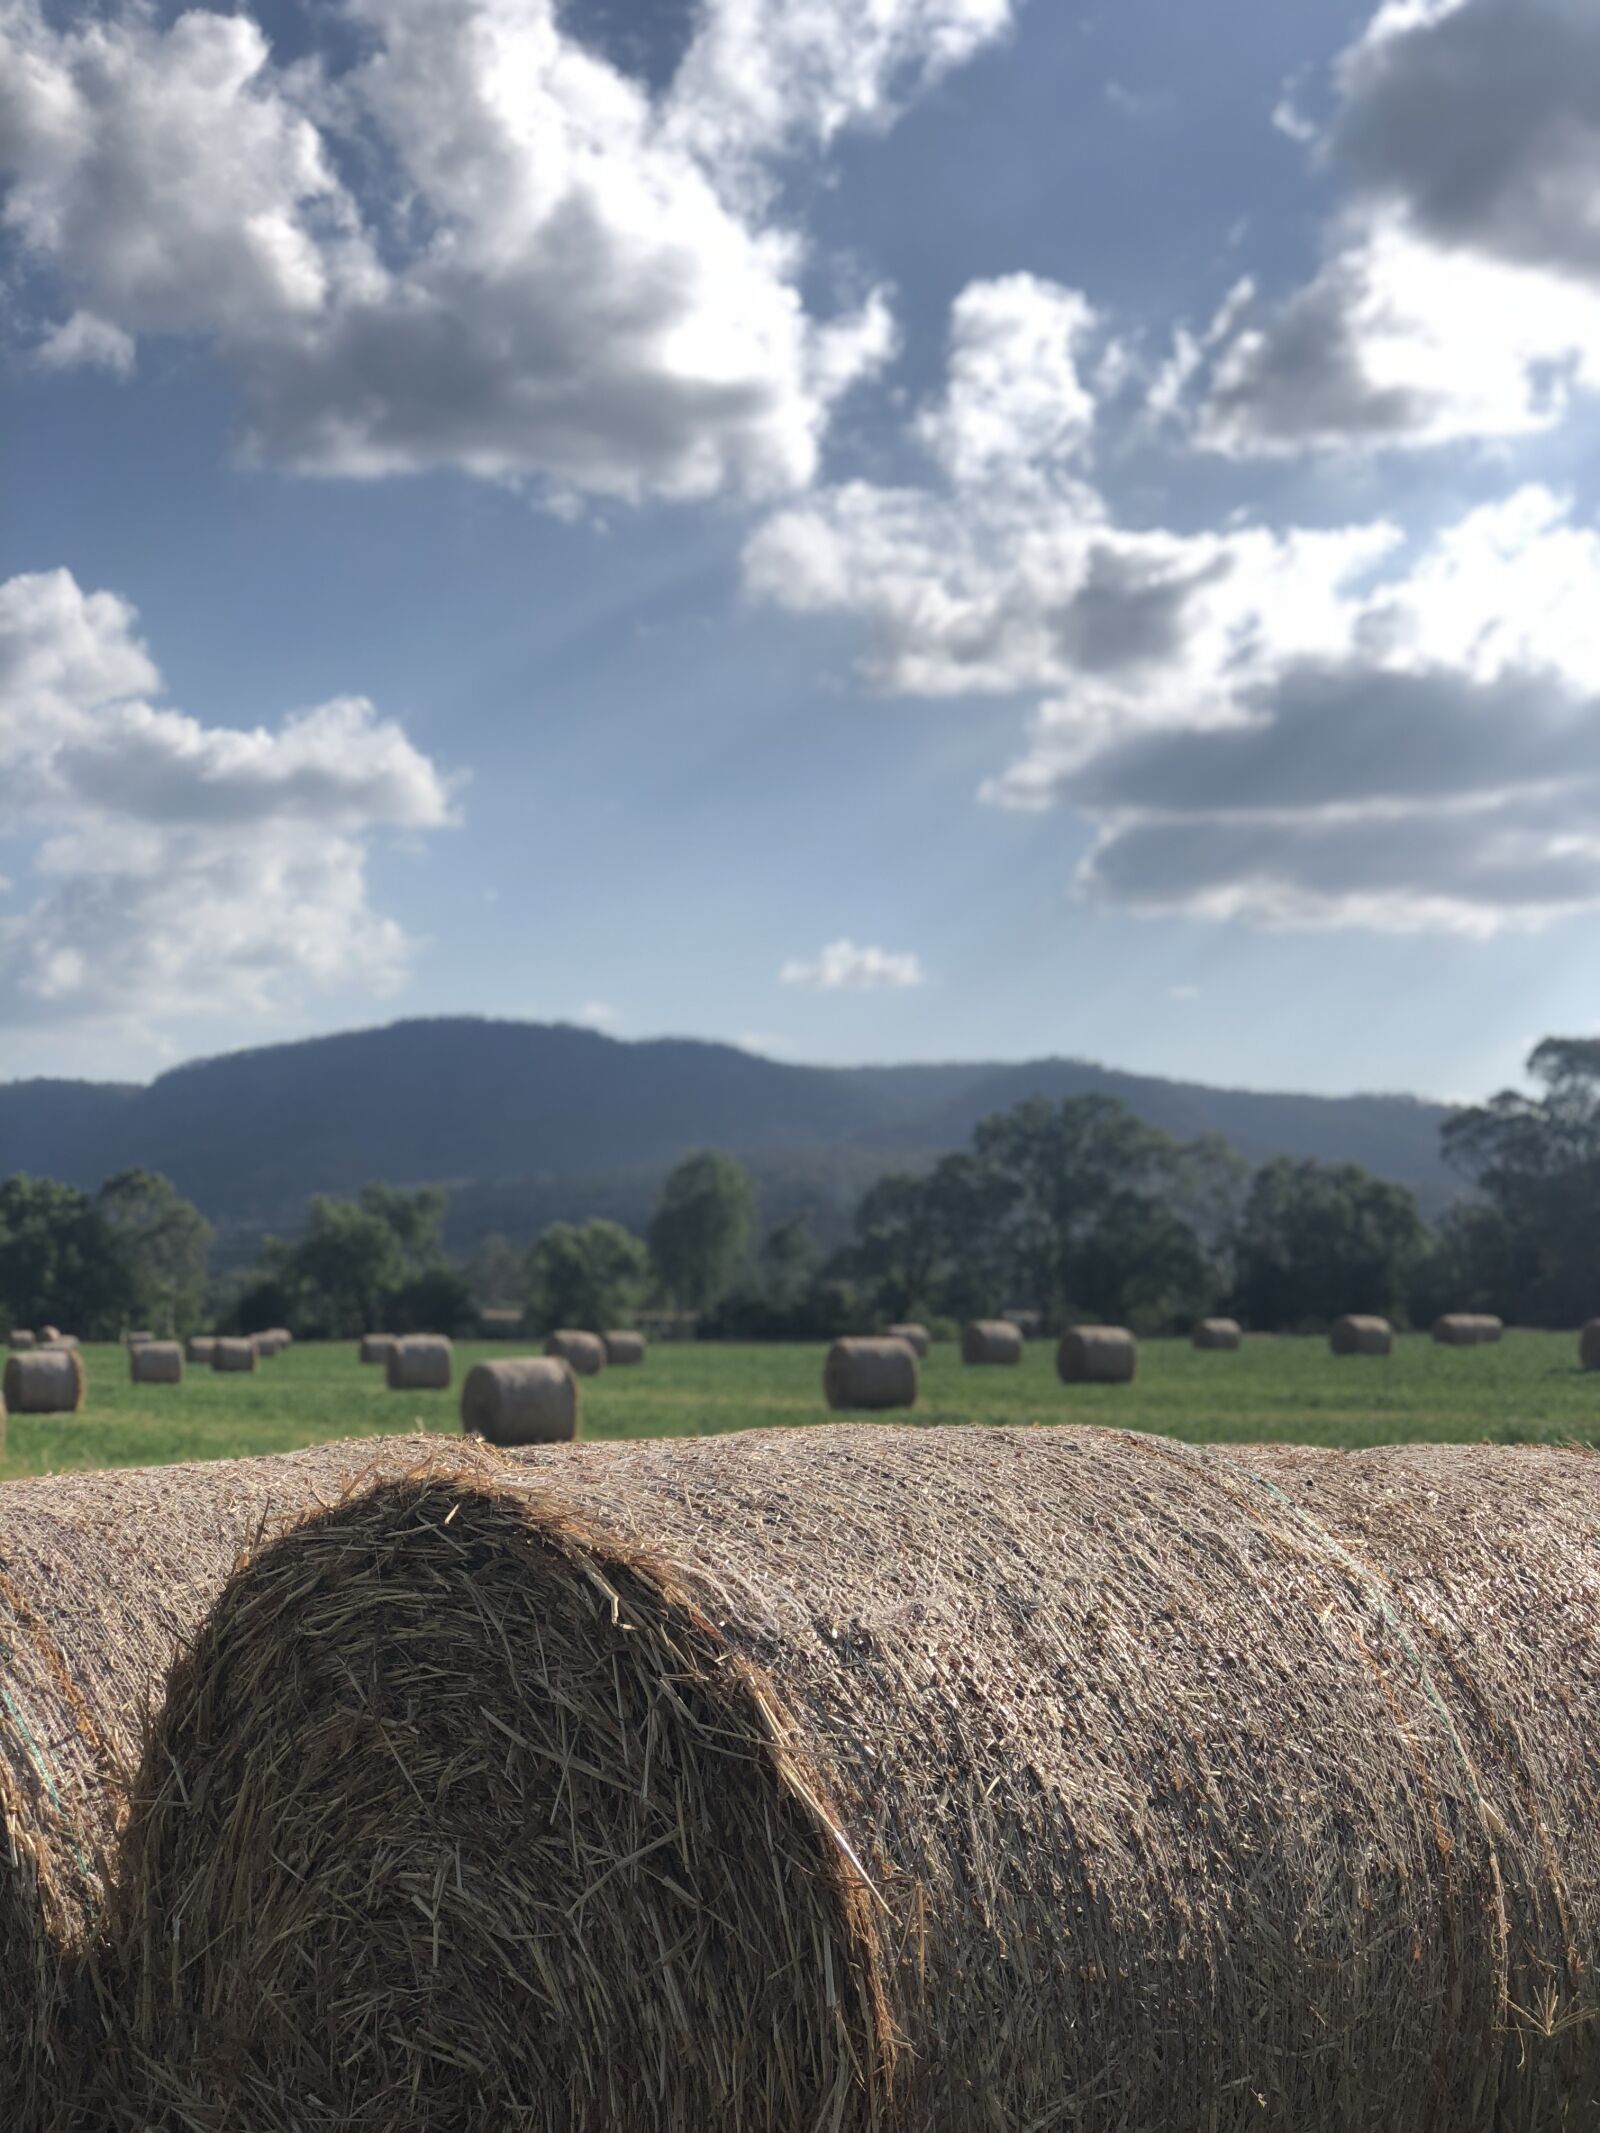 iPhone 8 Plus back dual camera 6.6mm f/2.8 sample photo. Hay bale, hay, harvest photography